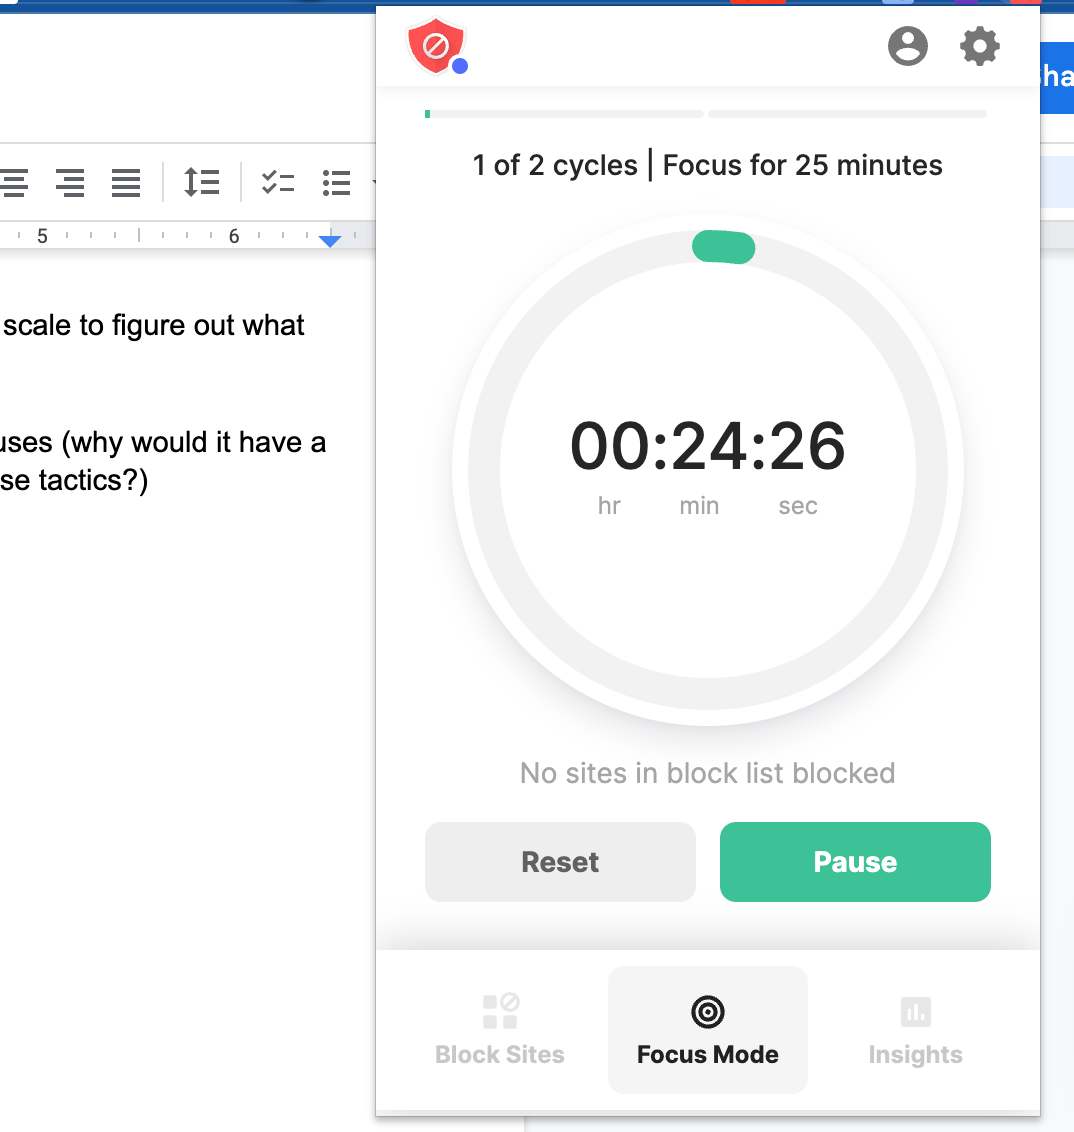 Focus mode timer set for 25 minutes with reset, pause, and site-blocking options.